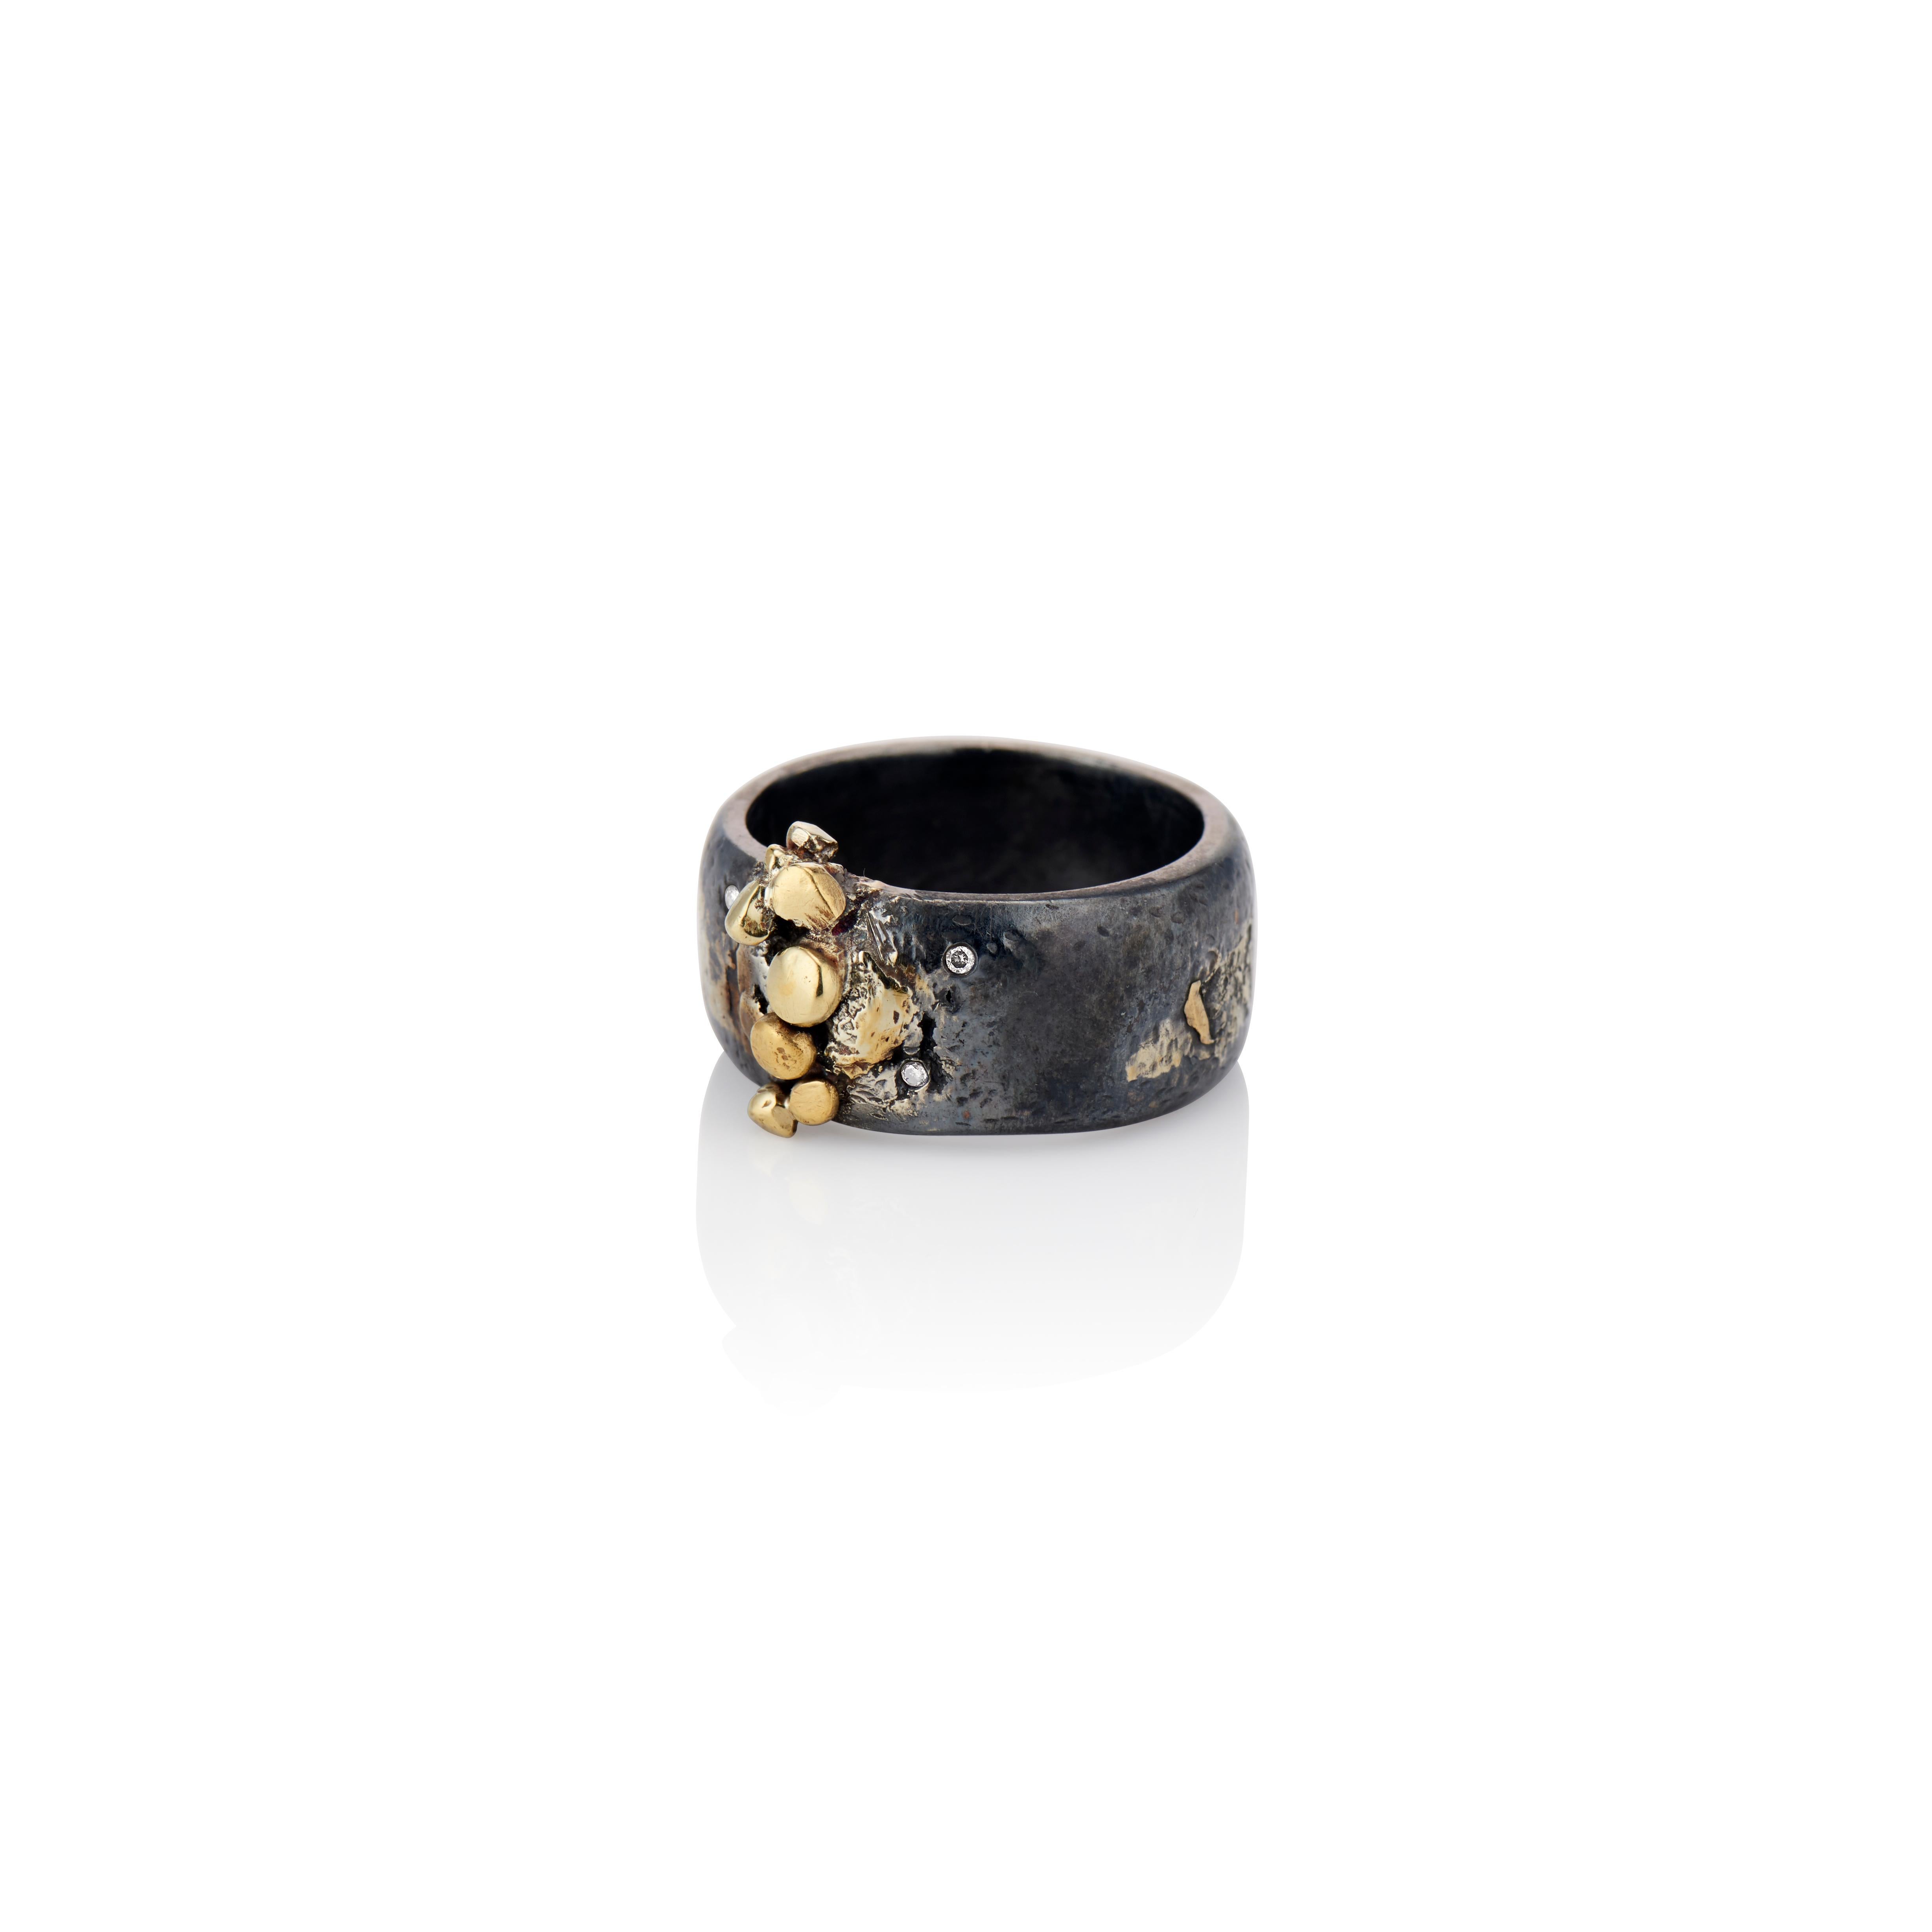 This beautifully textured, 22 karat yellow gold and oxidized Sterling silver band ring makes a unique statement.  Hand wrought from the metal, it is gently curved with 22 karat yellow gold sculpted 